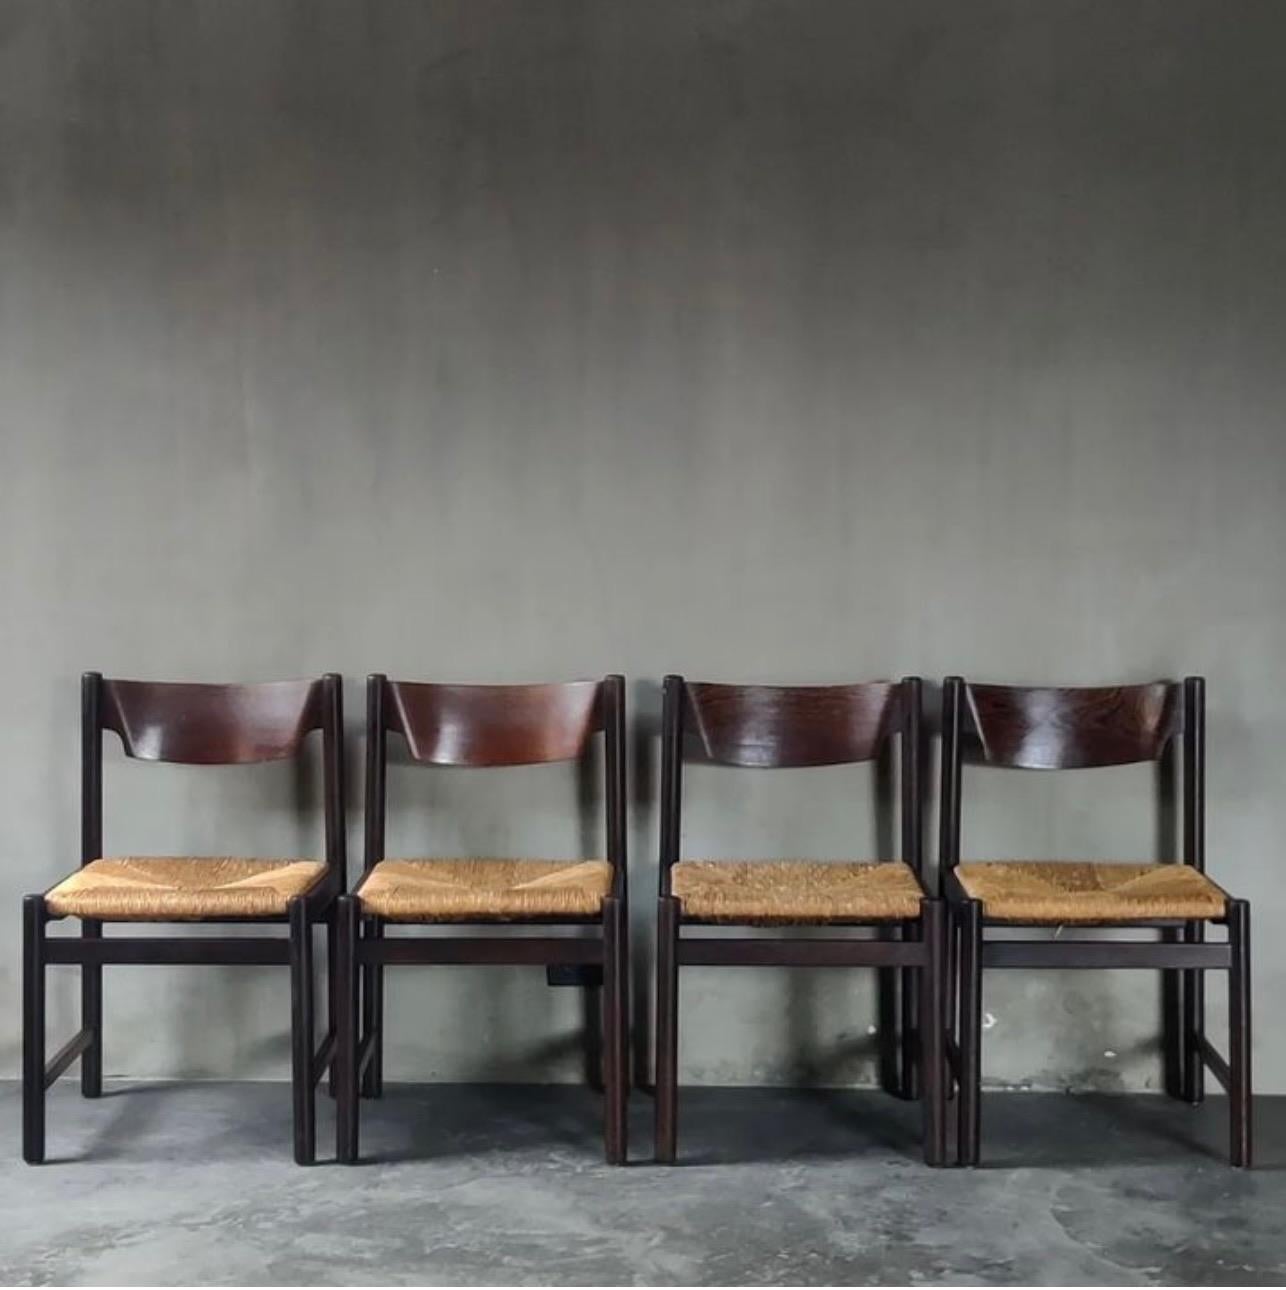 Set of four Dutch mid-century wenge (otherwise known as hardwood) dining chairs with woven rush seats, designed by Martin Visser for Spectrum. Chic and modern with a relaxed, 'lazy fancy' vibe. 

Netherlands, circa 1950

Dimensions: 18.5W x